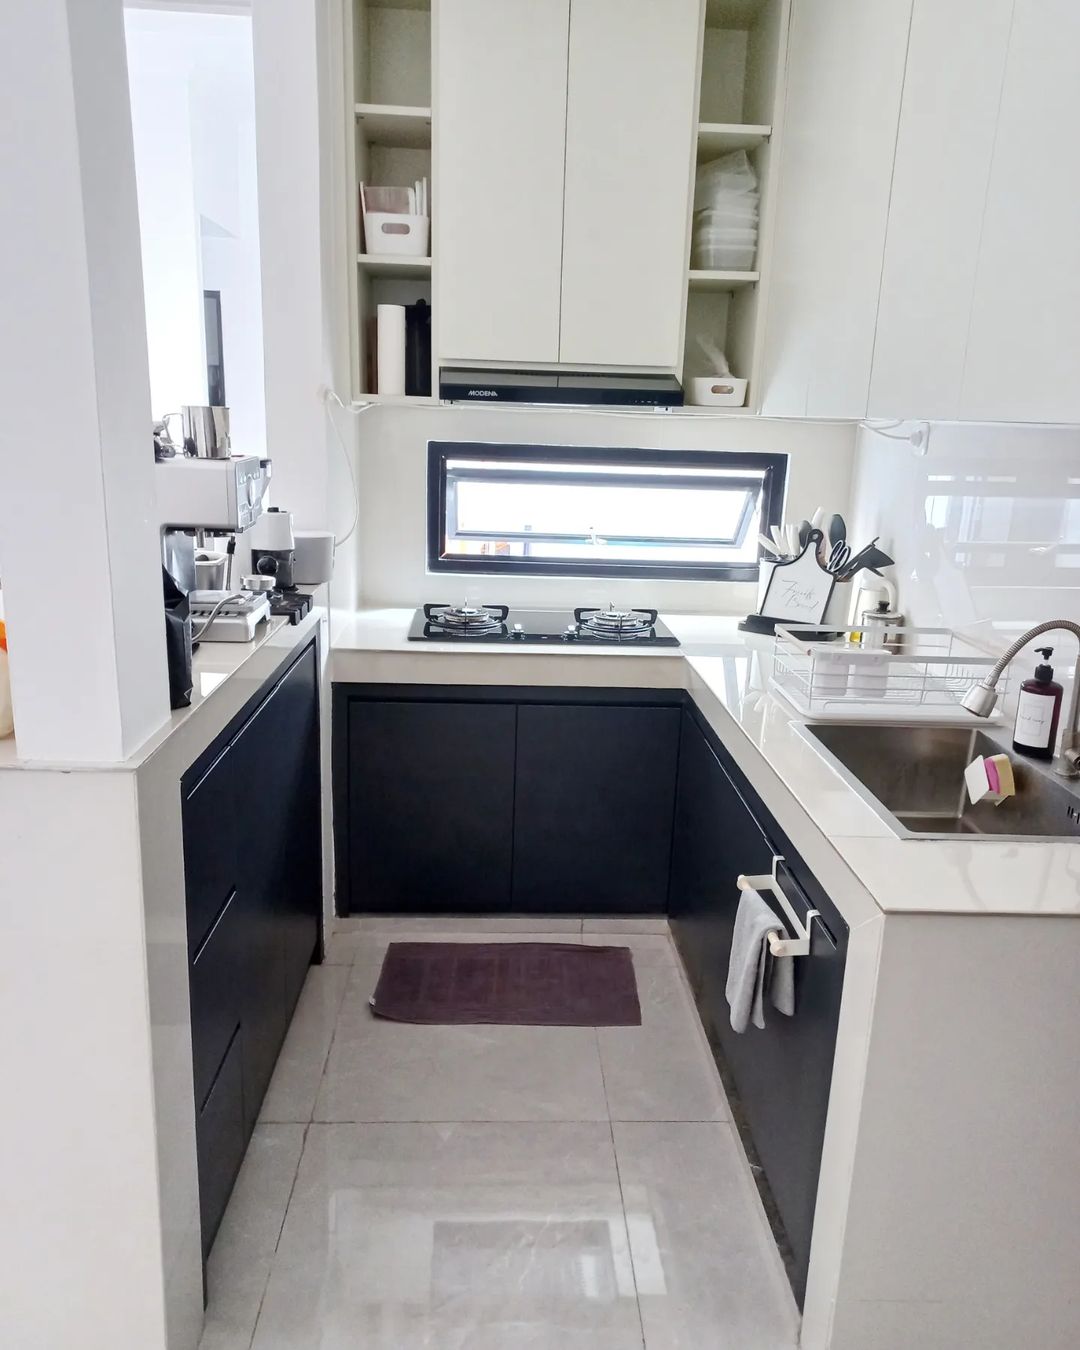 U-Shaped Kitchen In A Small Space